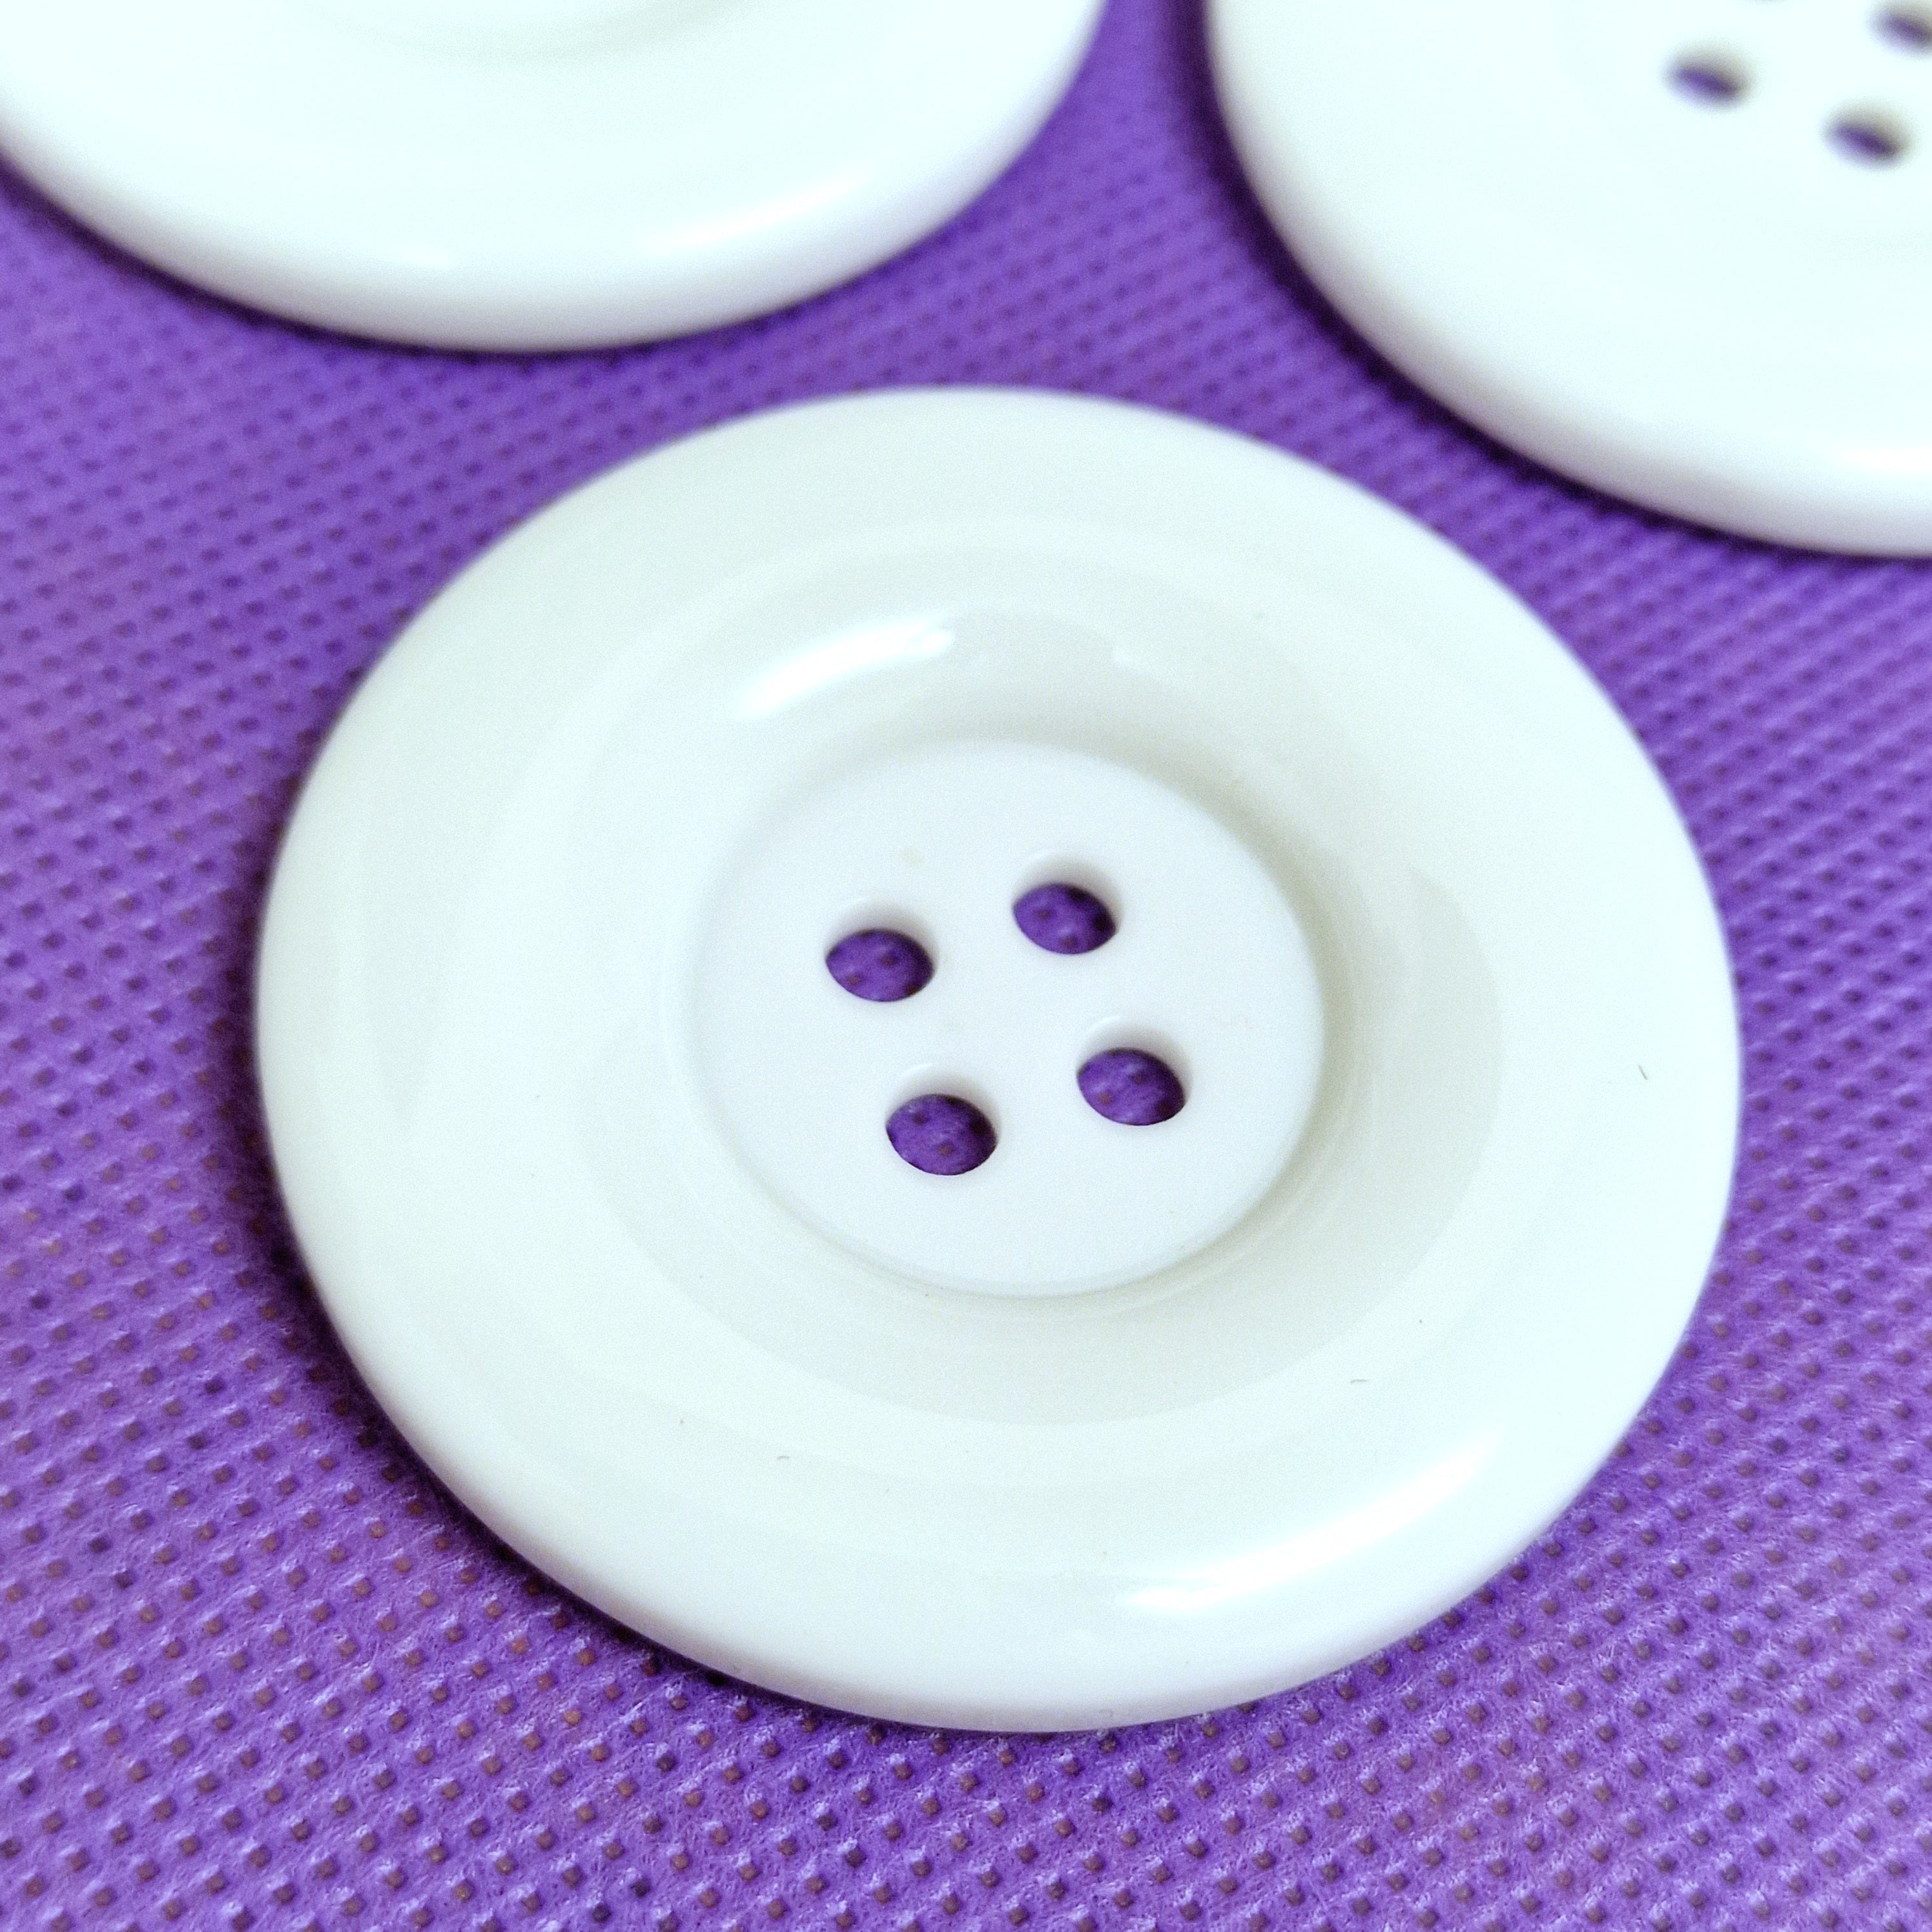 MajorCrafts 4pcs 50mm White 4 Holes Round Large Resin Sewing Buttons (wide edge)